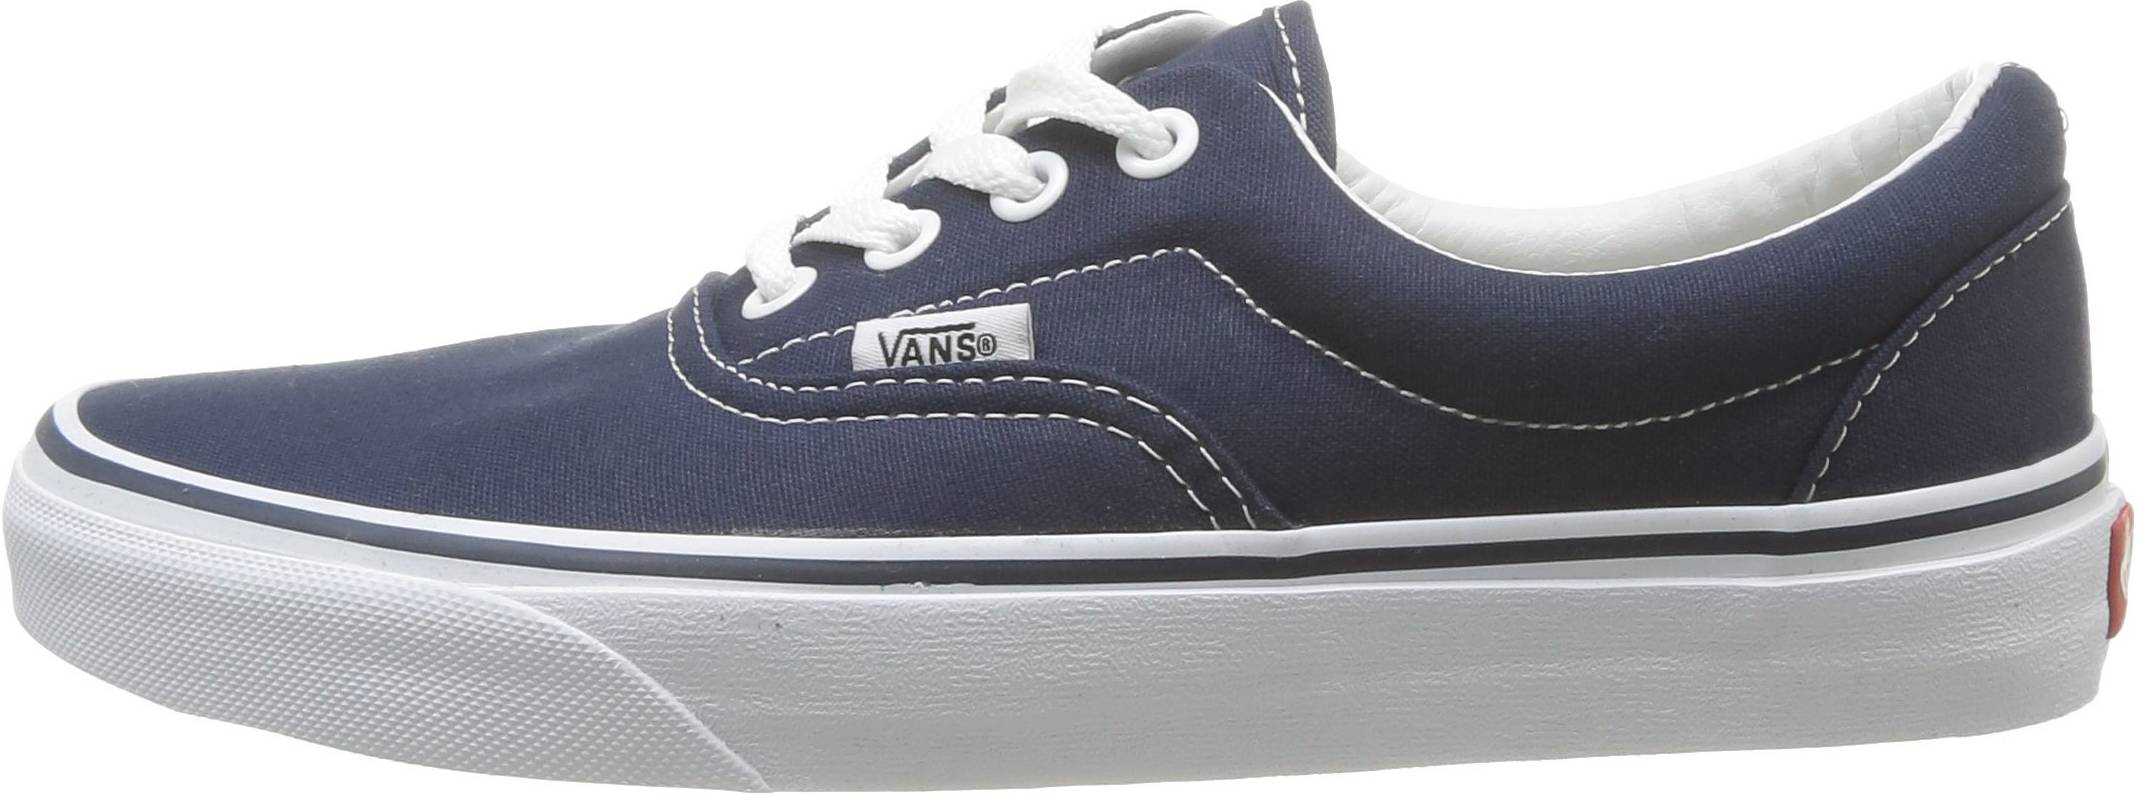 40+ Blue Vans sneakers: Save up to 40%